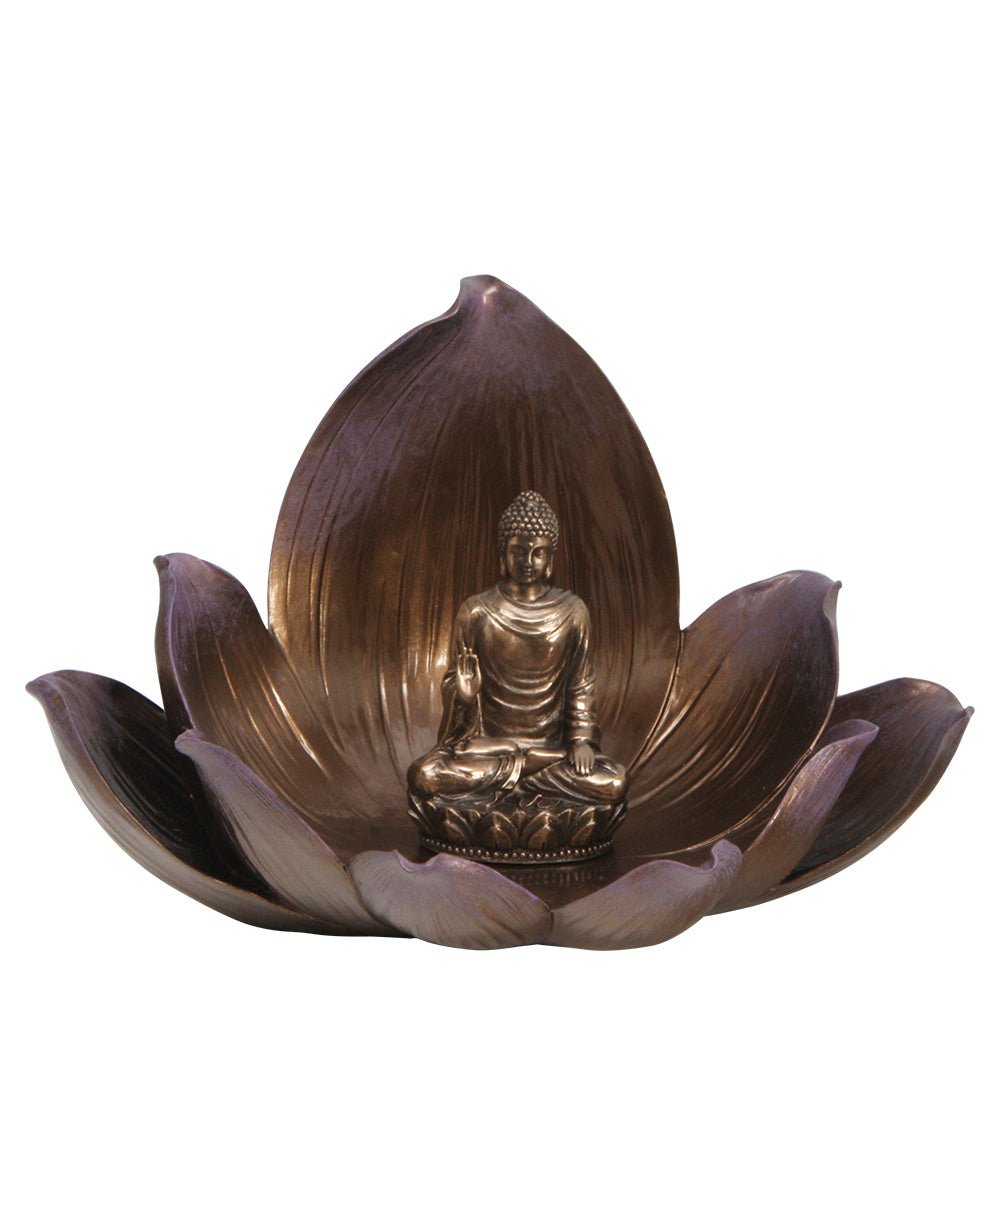 Serene Buddha and Lotus Statue - Sculptures & Statues